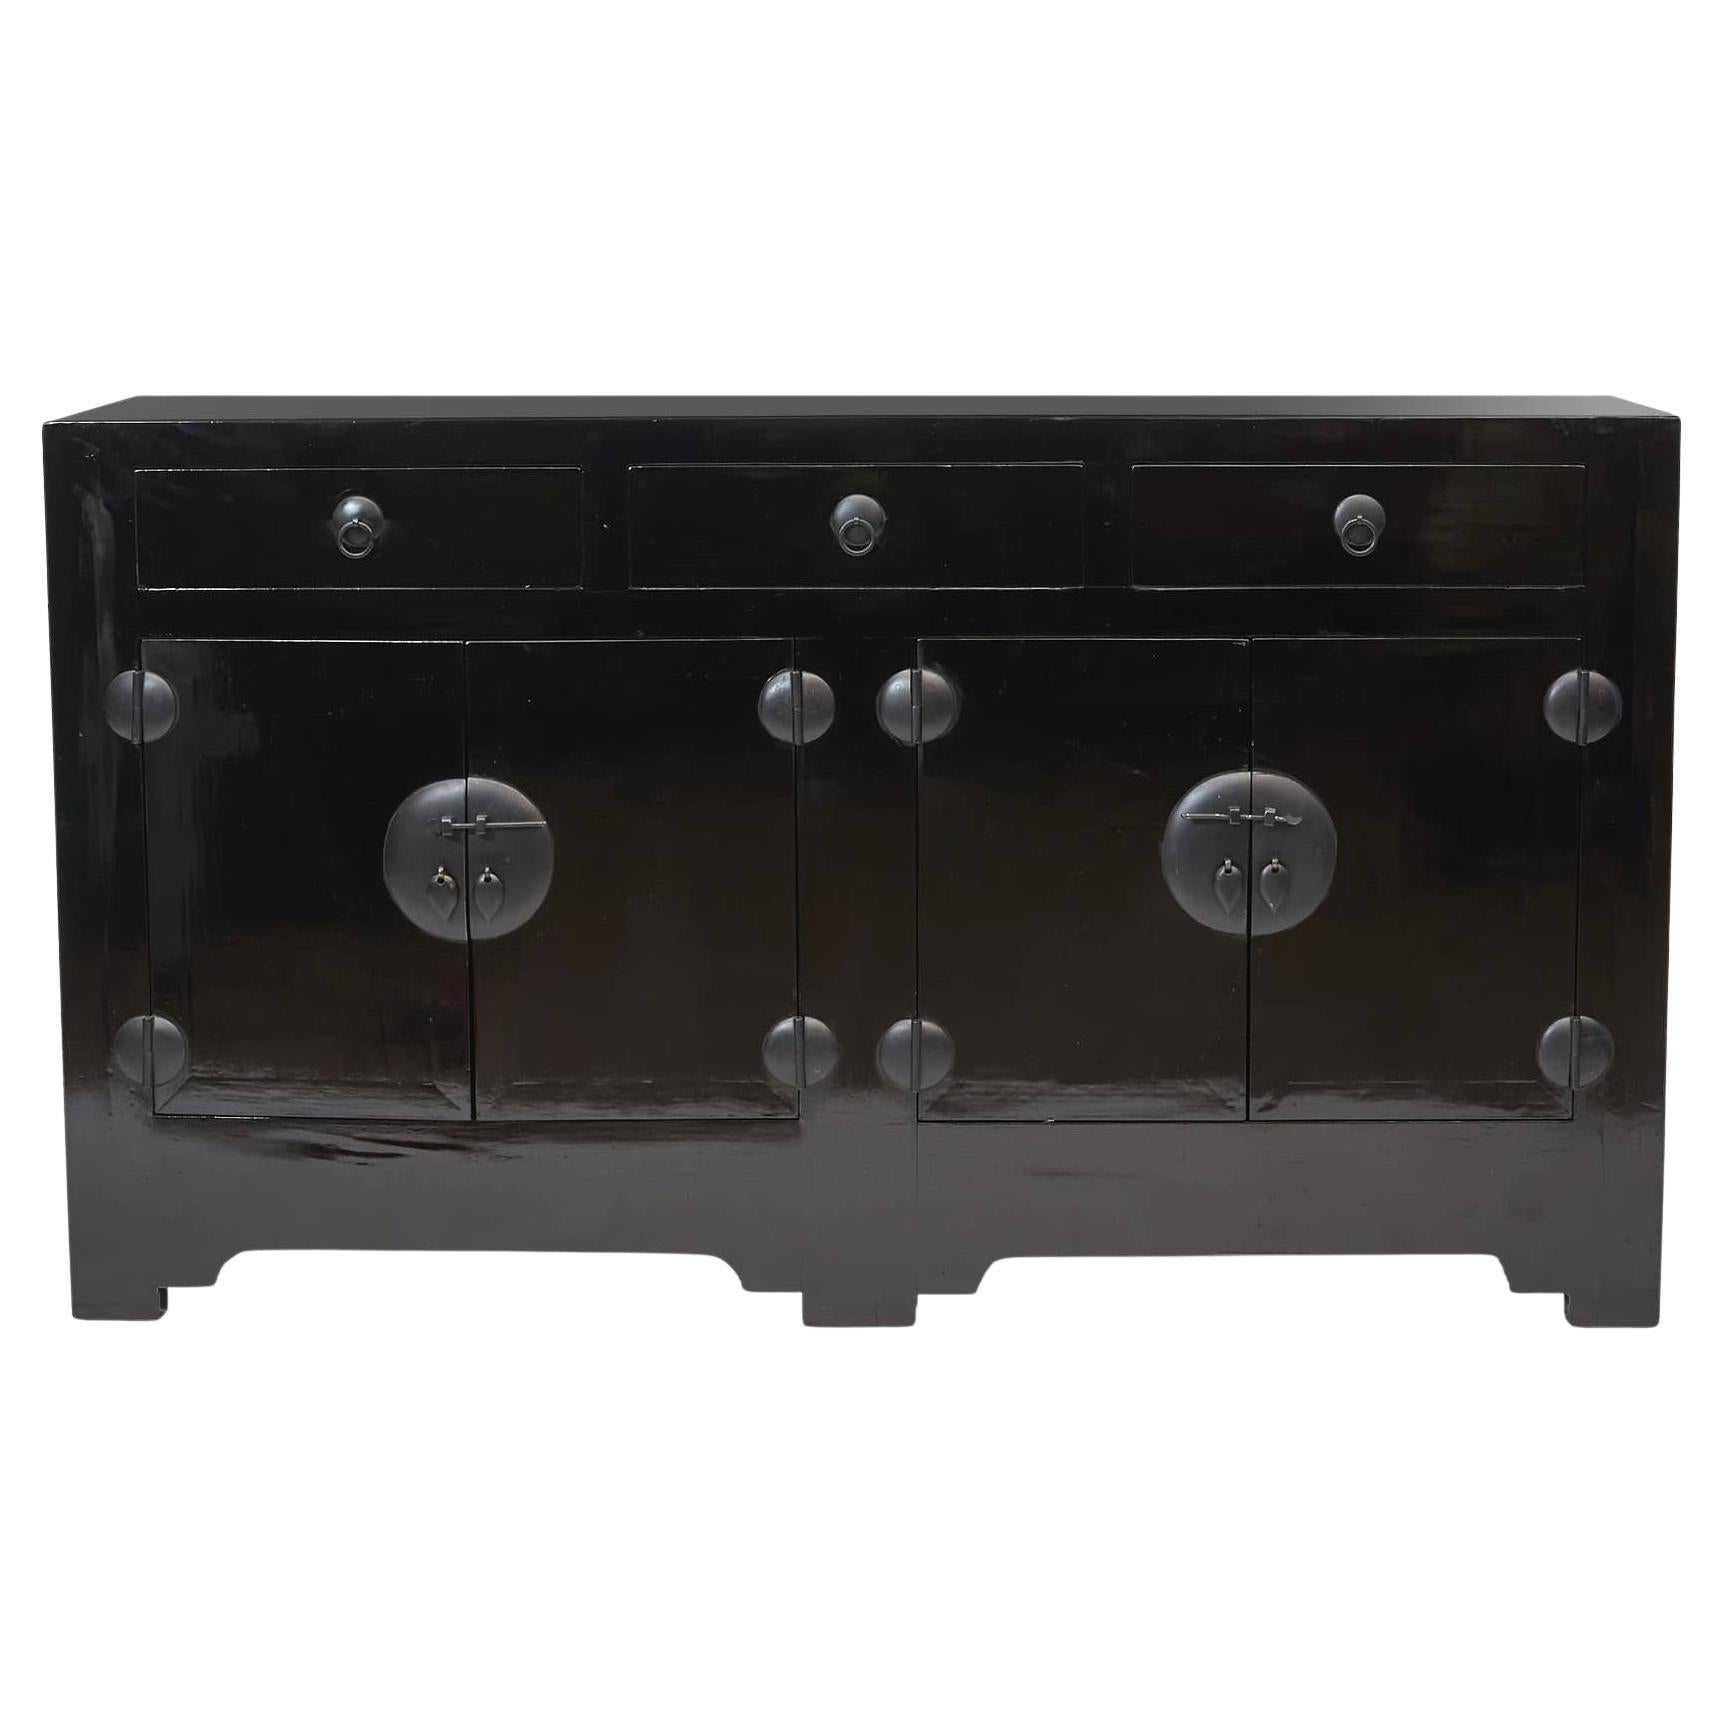 Black Lacquer Sideboard Cabinet from Tianjin, 1860 - 1880 For Sale